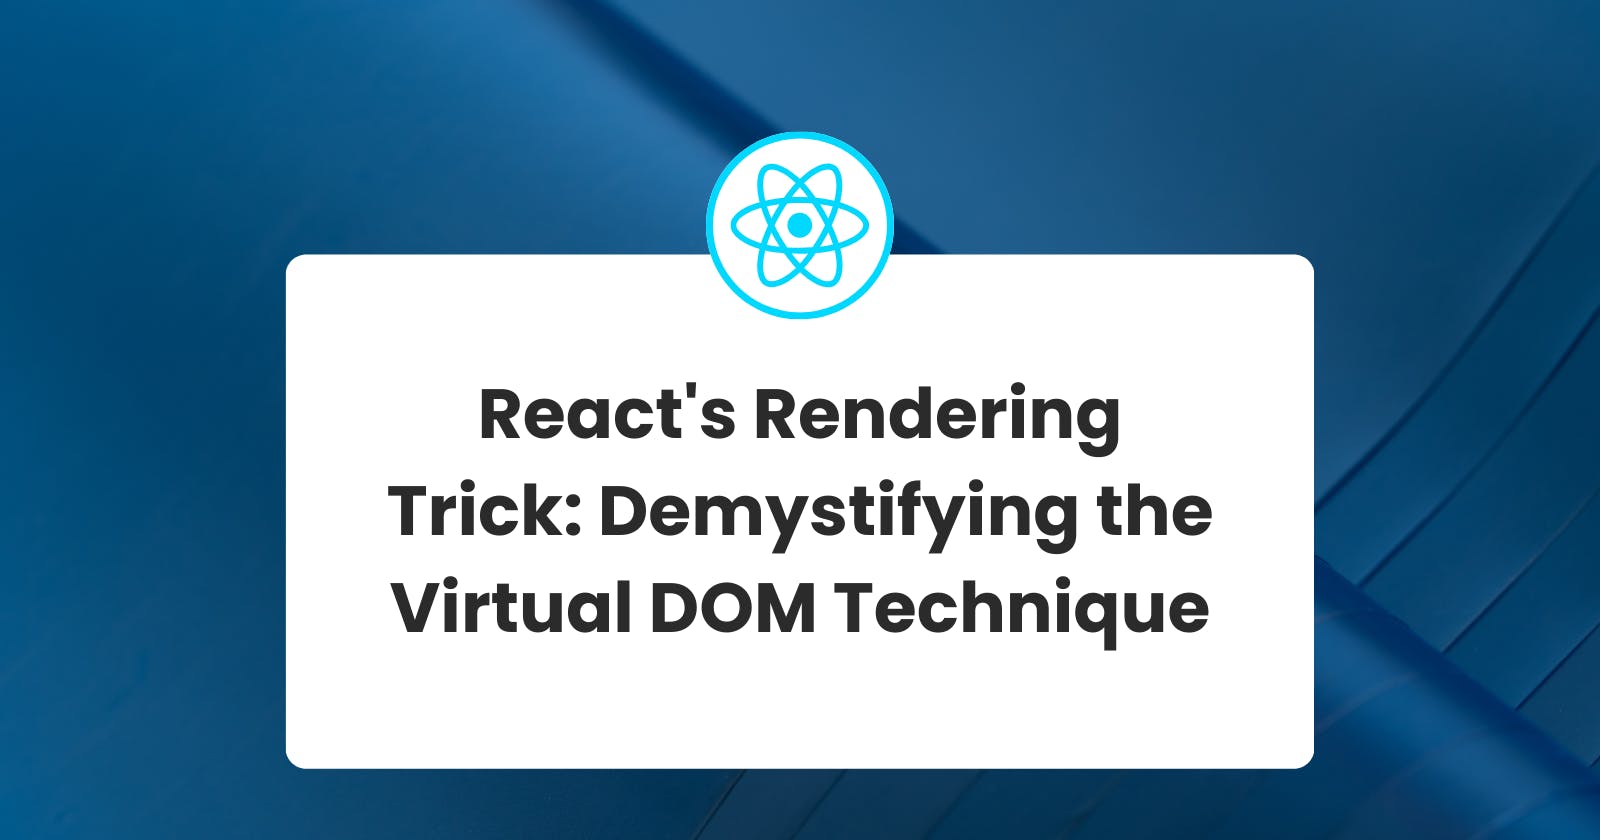 React's Rendering Trick: Demystifying the Virtual DOM Technique